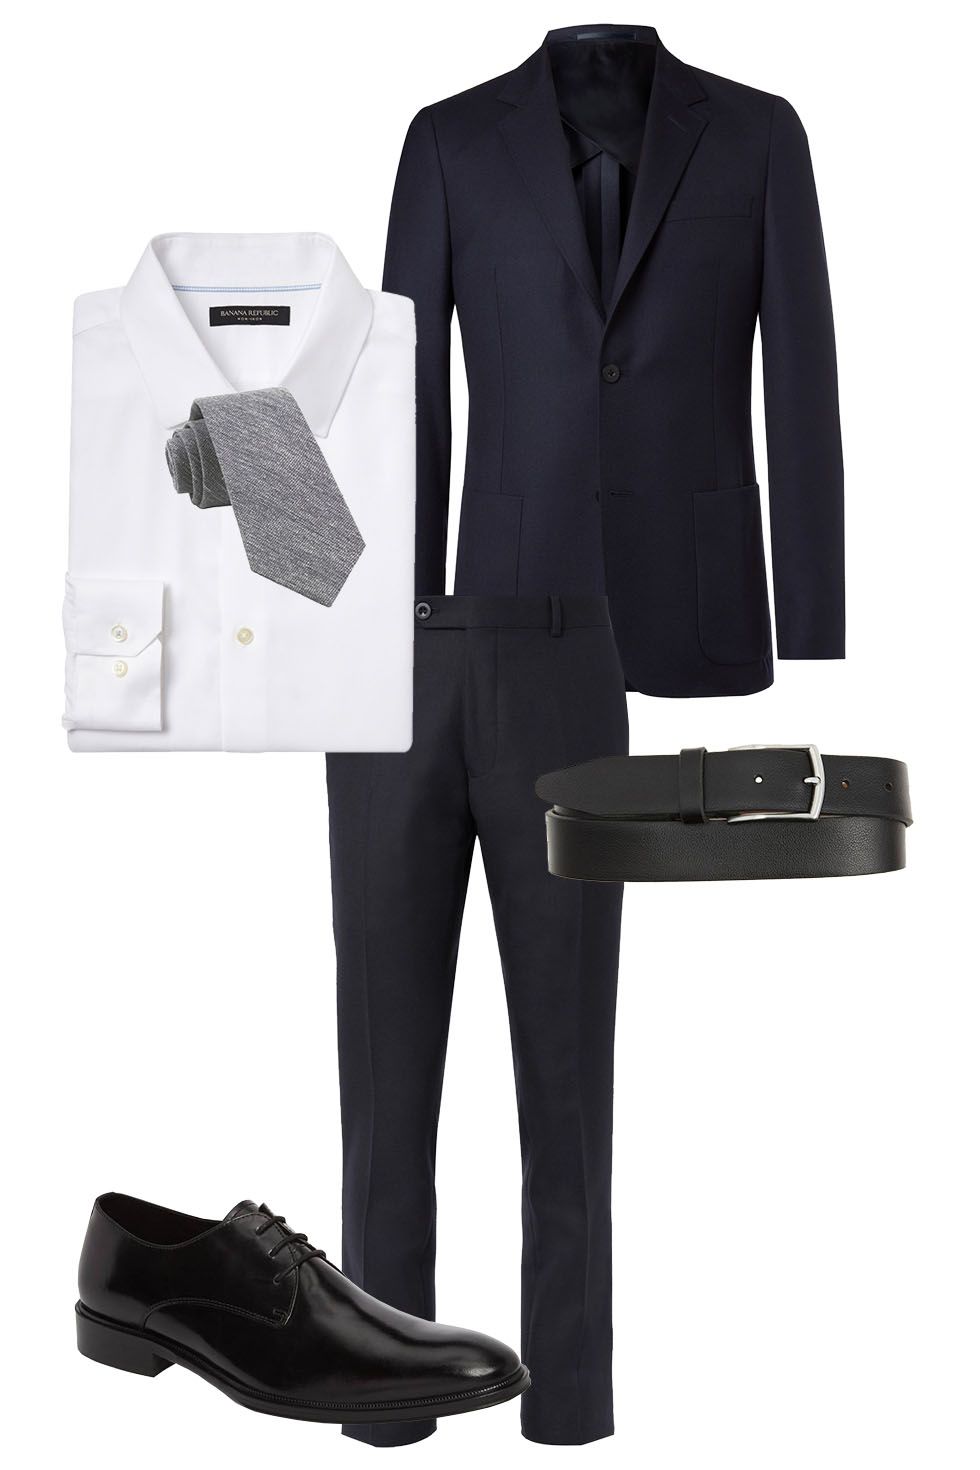 Job Interview Attire and Outfit to Wear for Men - Suits Expert